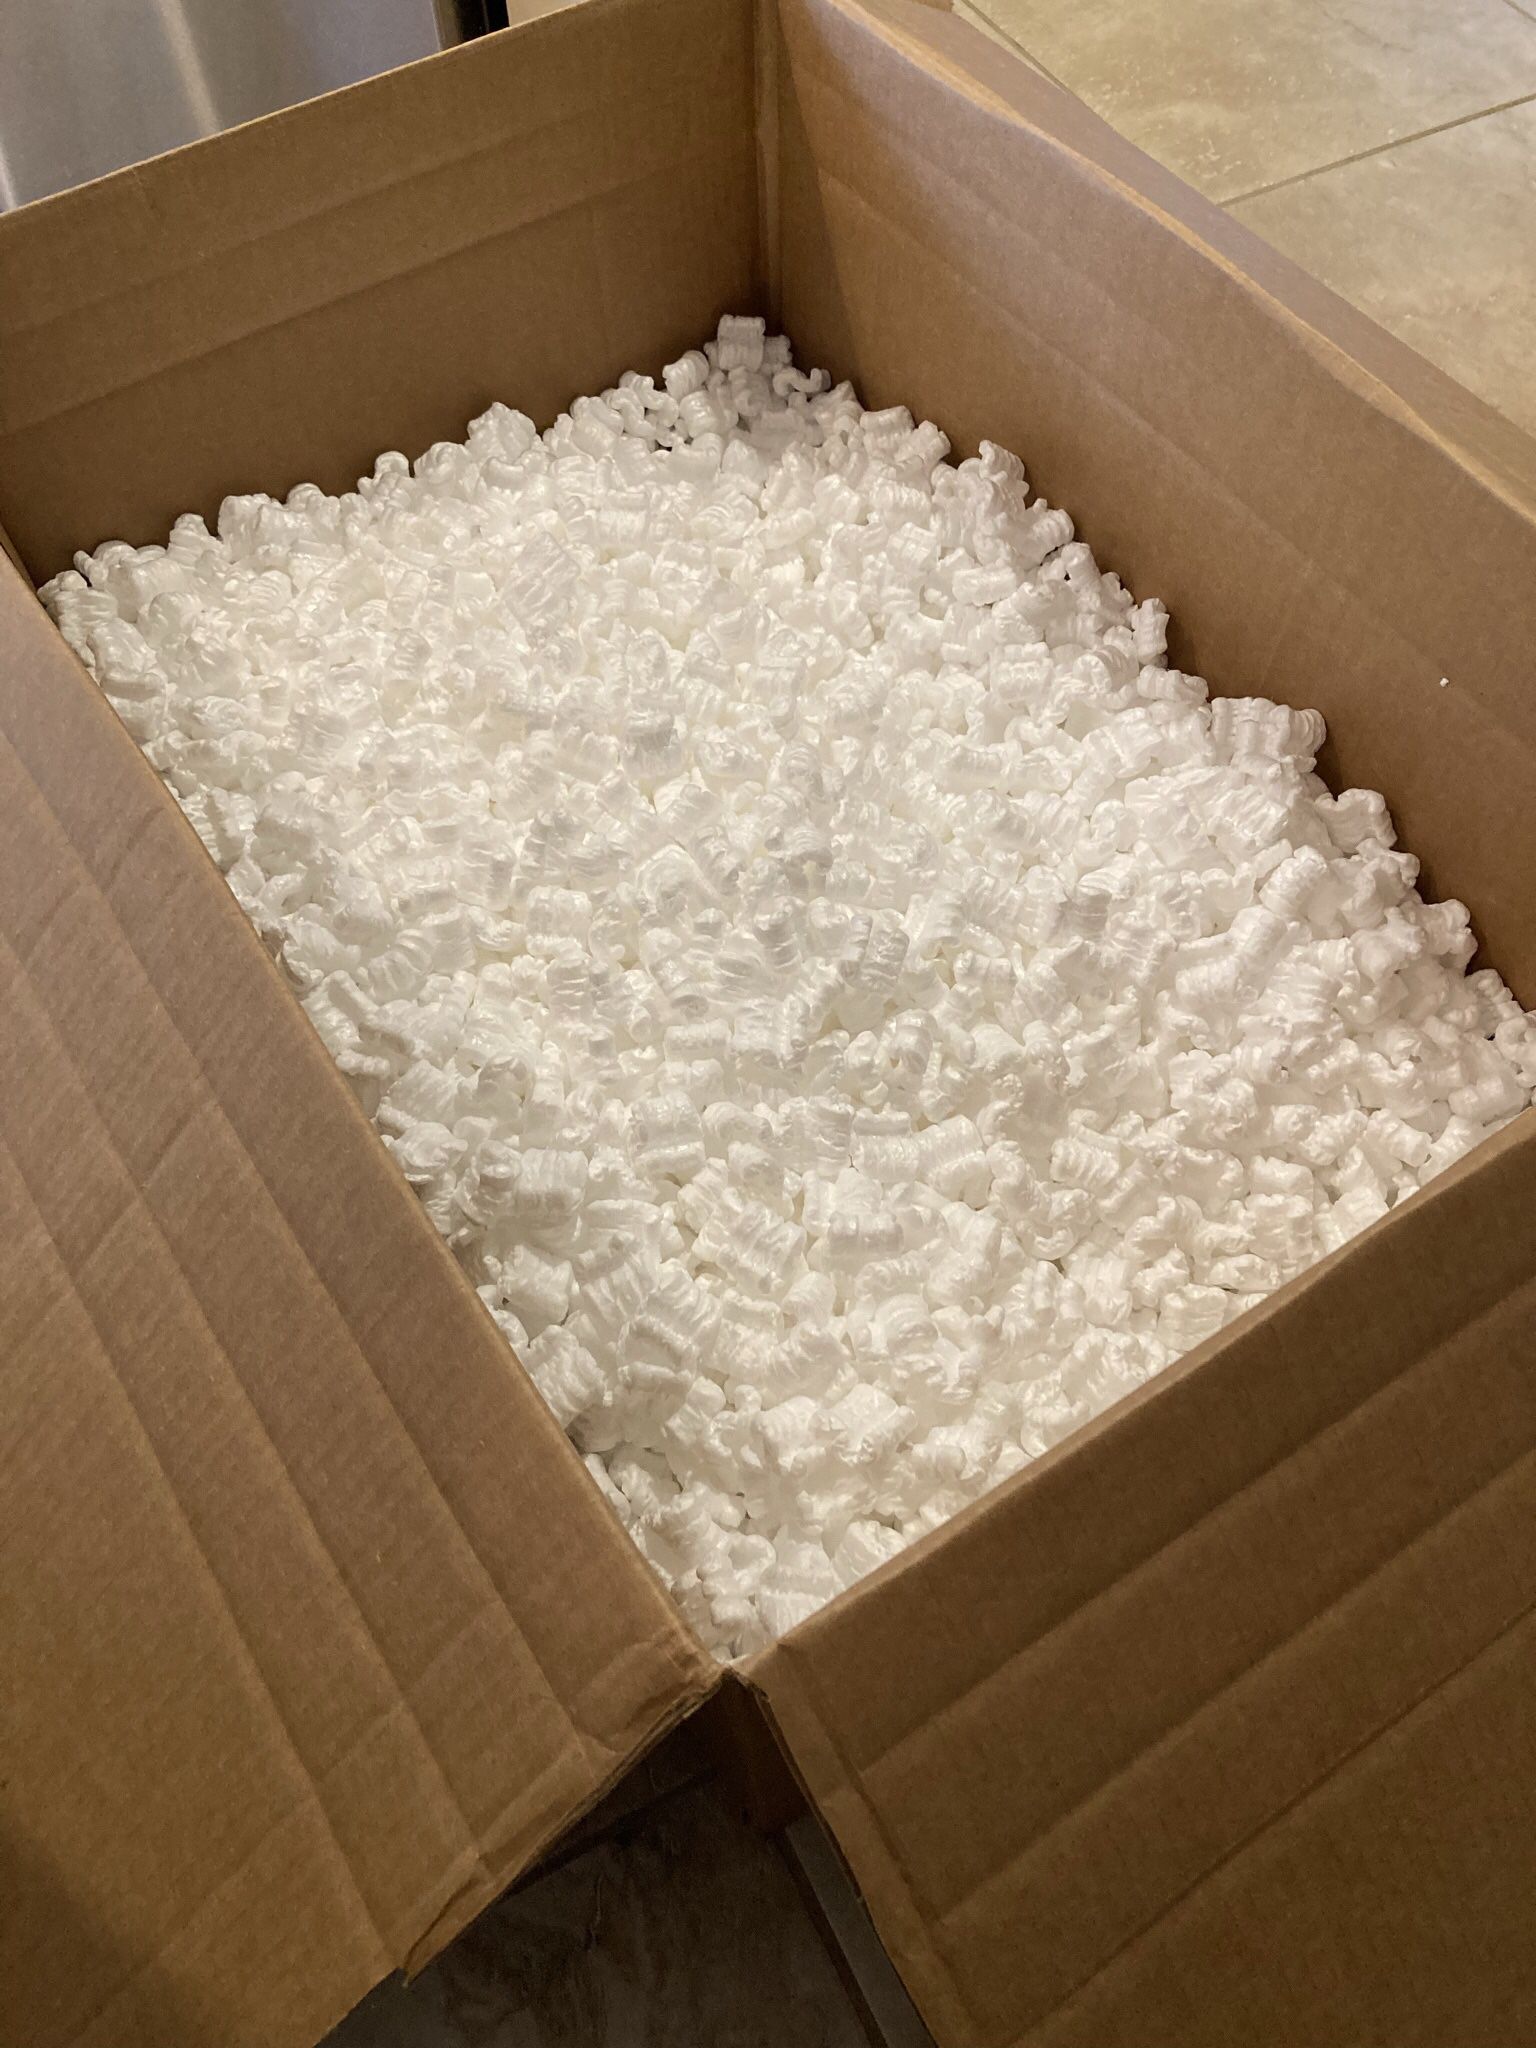 FREE…large box of Styrofoam  Packing Peanuts. Each peanut Is 1 &1/2” Square